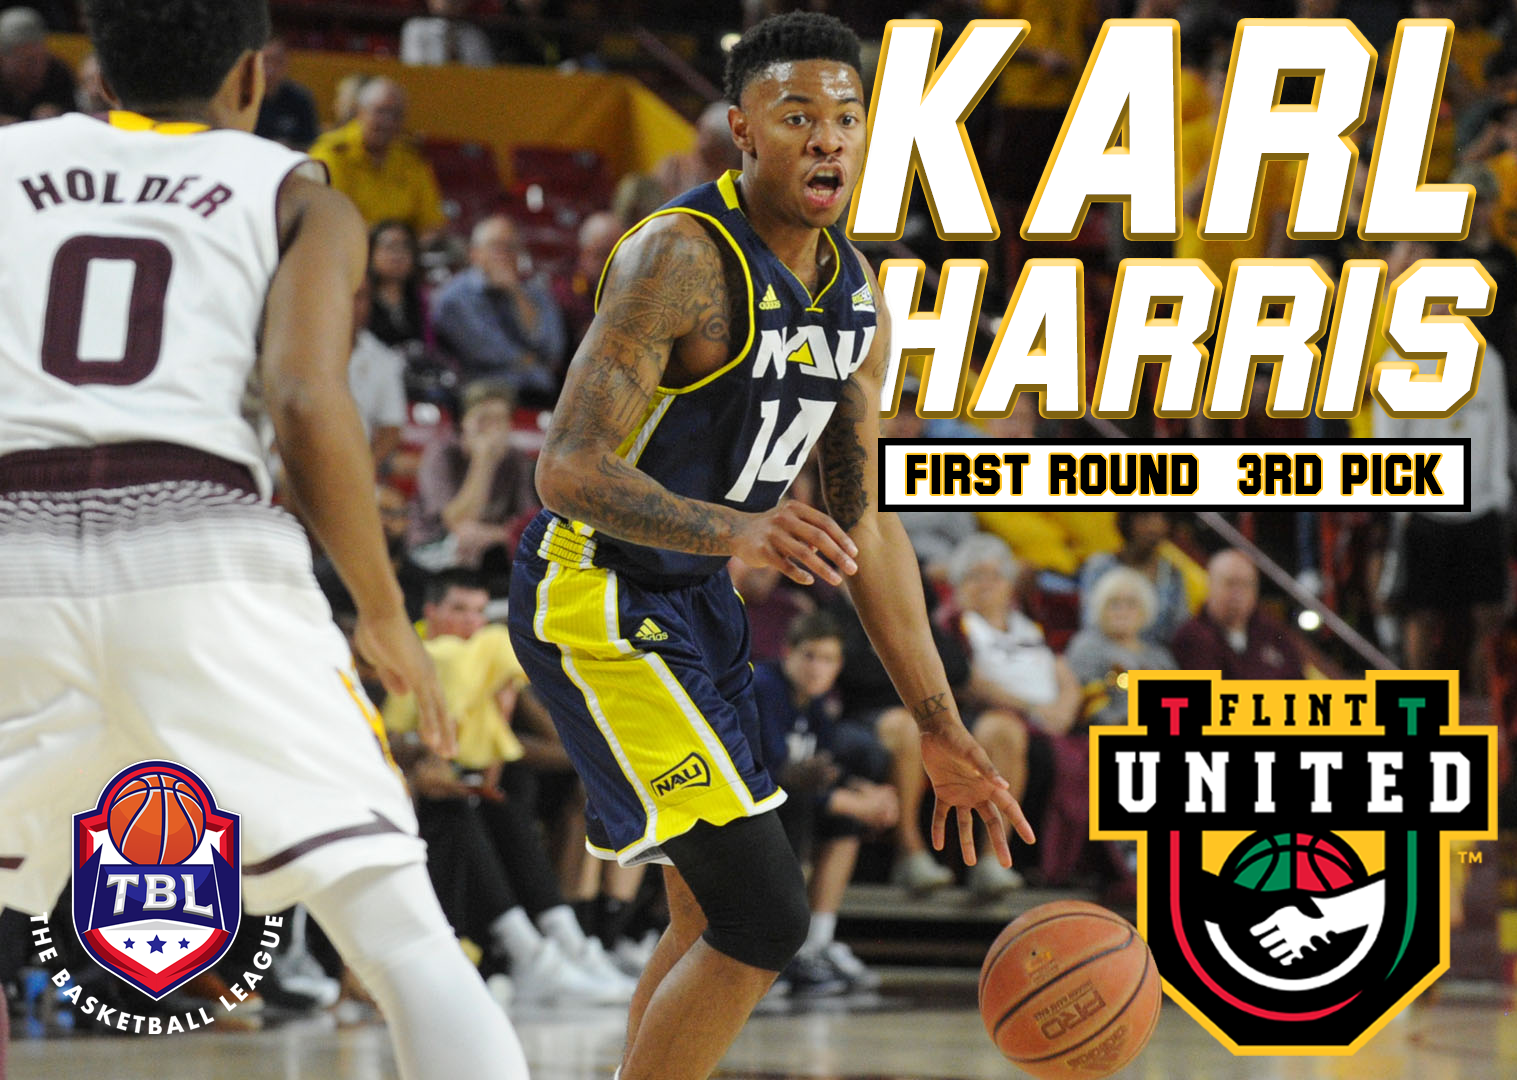 Karl Harris was selected by the Flint United with the third pick in The Basketball League Draft.